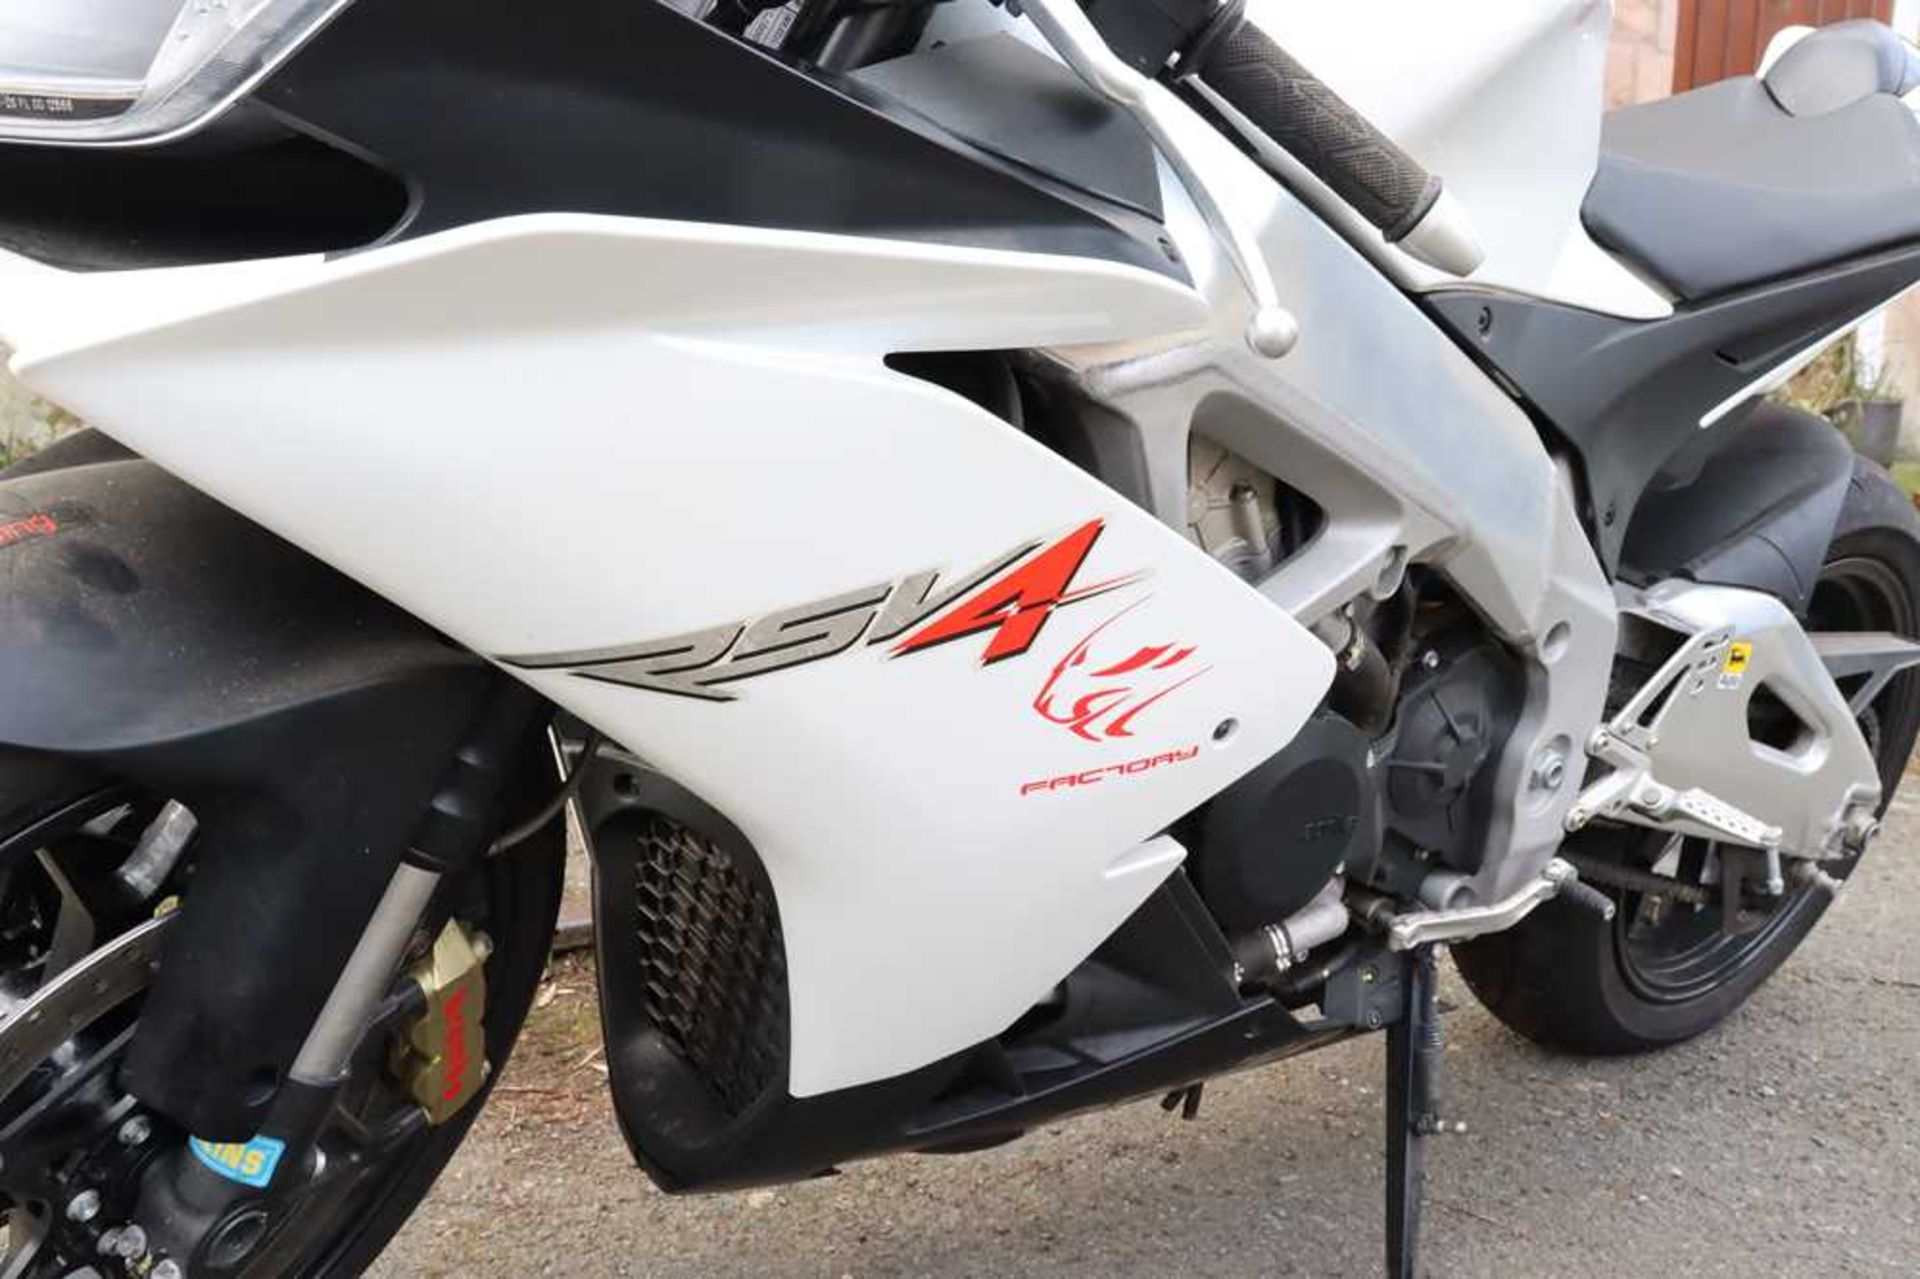 2010 Aprilia RSV4R Fitted with Moto GP style exhaust, original included - Image 10 of 44